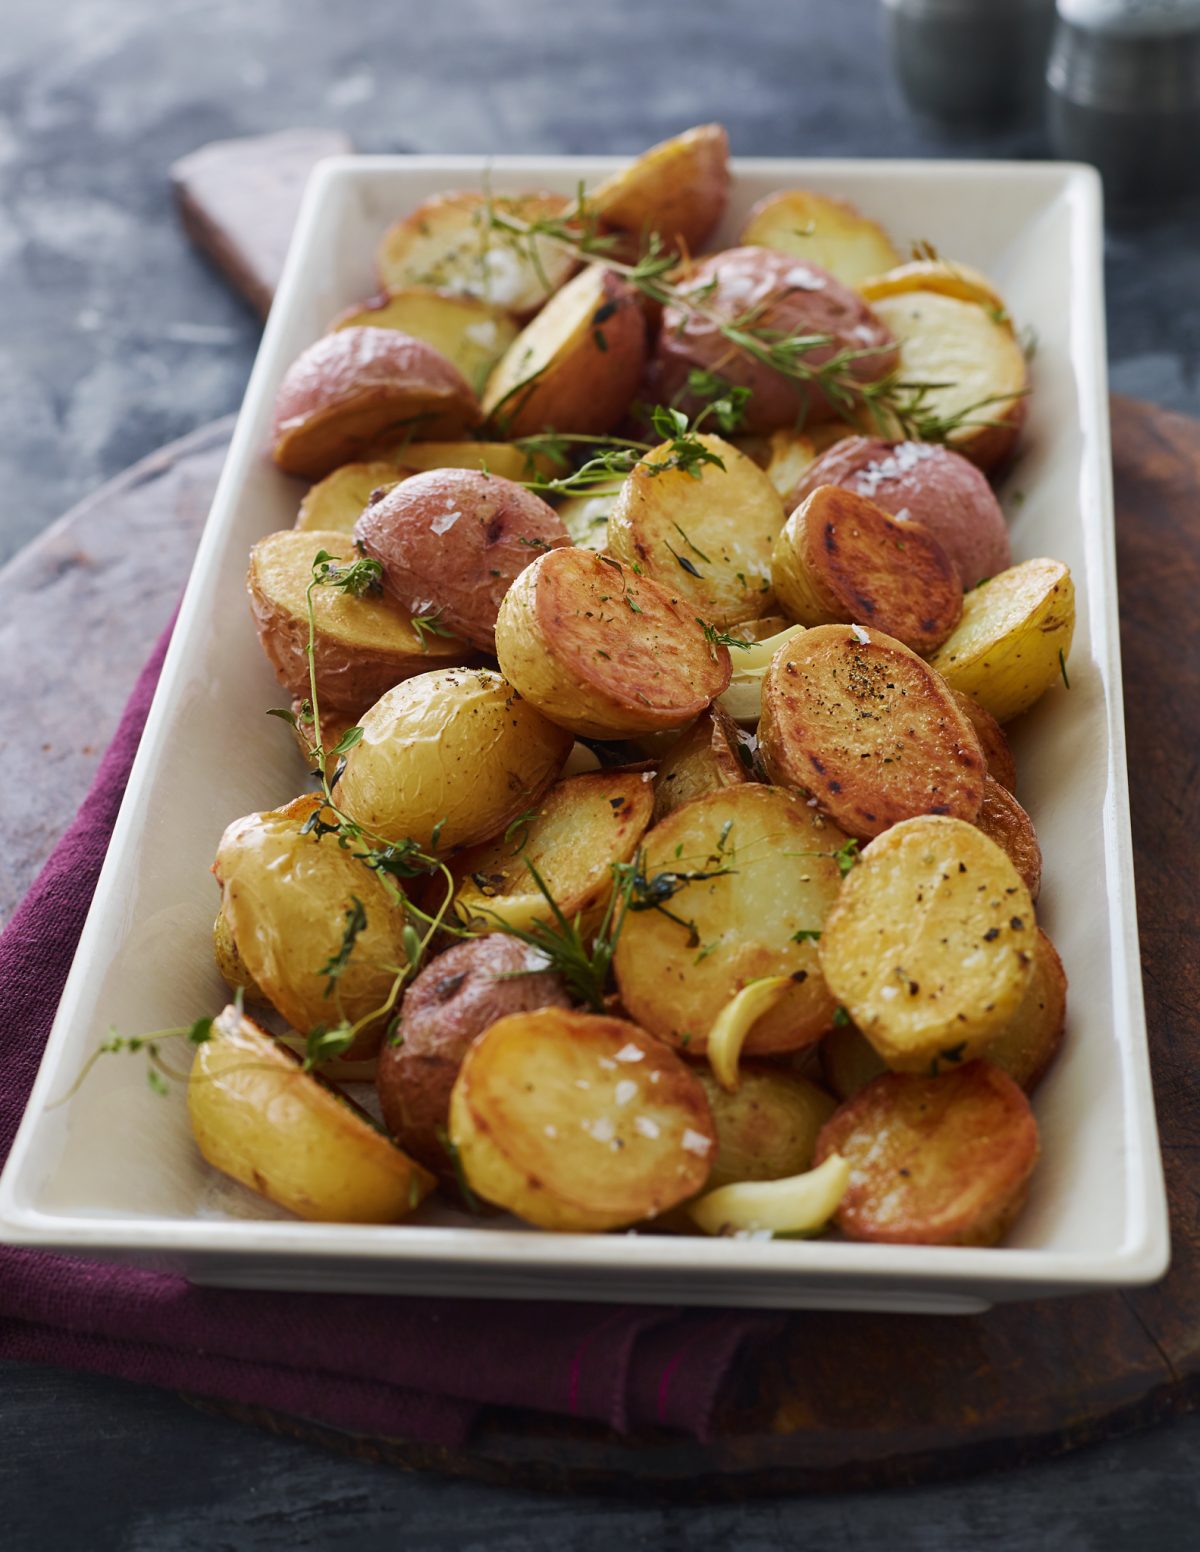 Spicy Roasted Potatoes Recipe - easy seasoned potatoes in the oven!